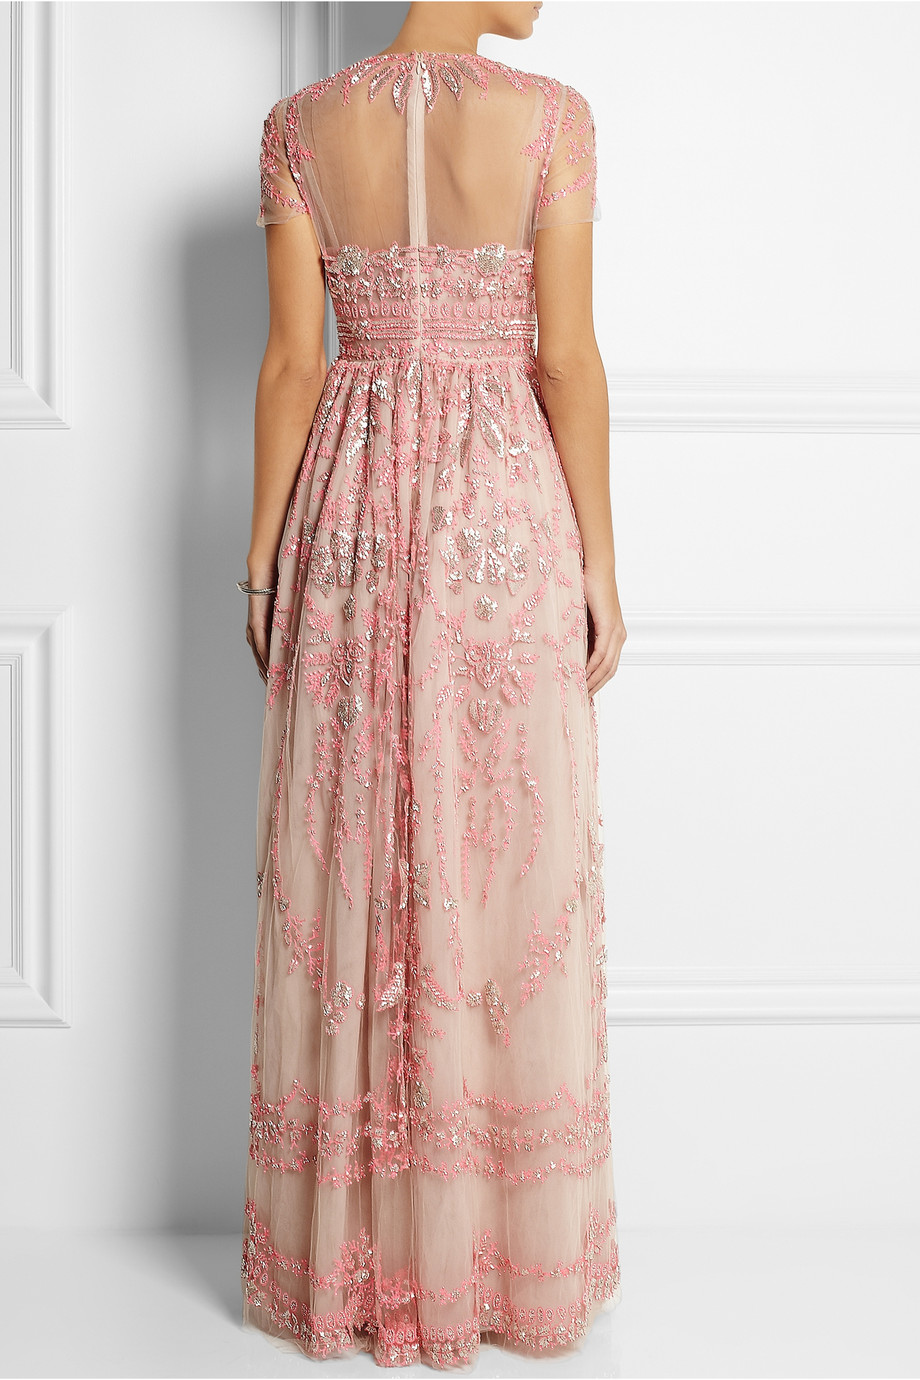 Lyst - Valentino Embellished Tulle Gown in Pink